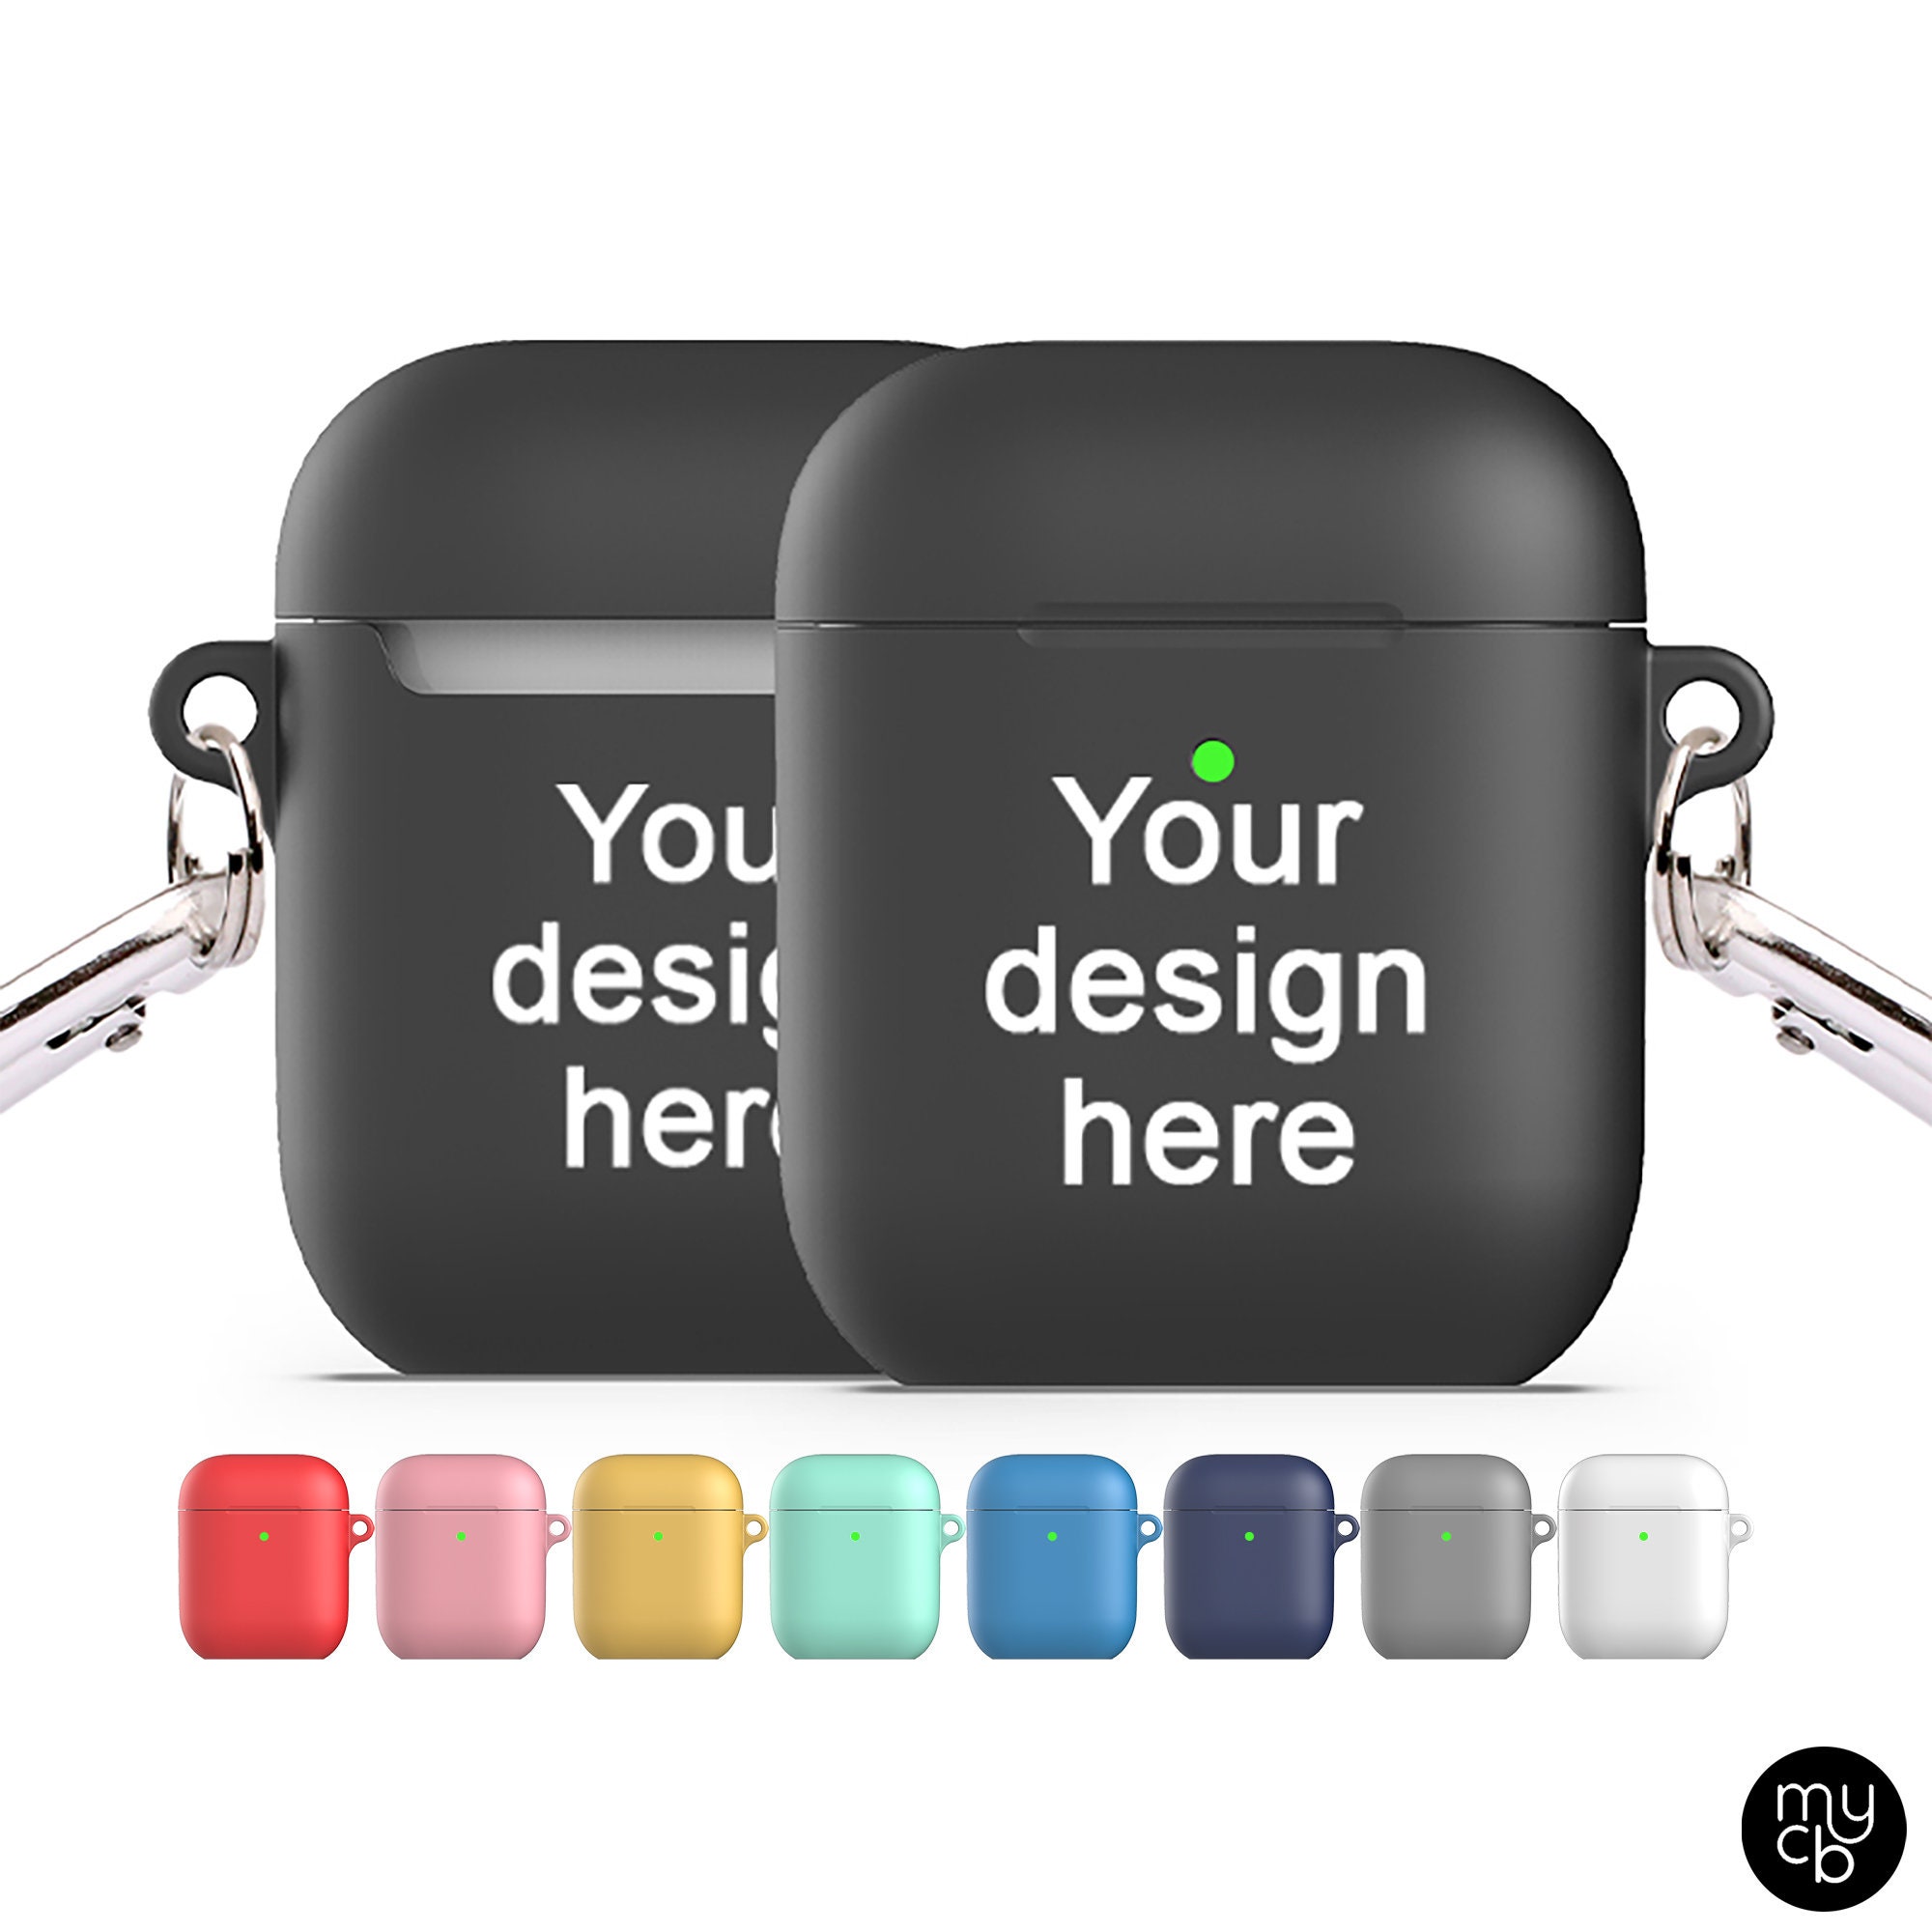 Personalized Airpod Case for Apple AirPods 1 & 2 with Keychain, Custom AirPods Case with Your Name & Photo for Men and Women